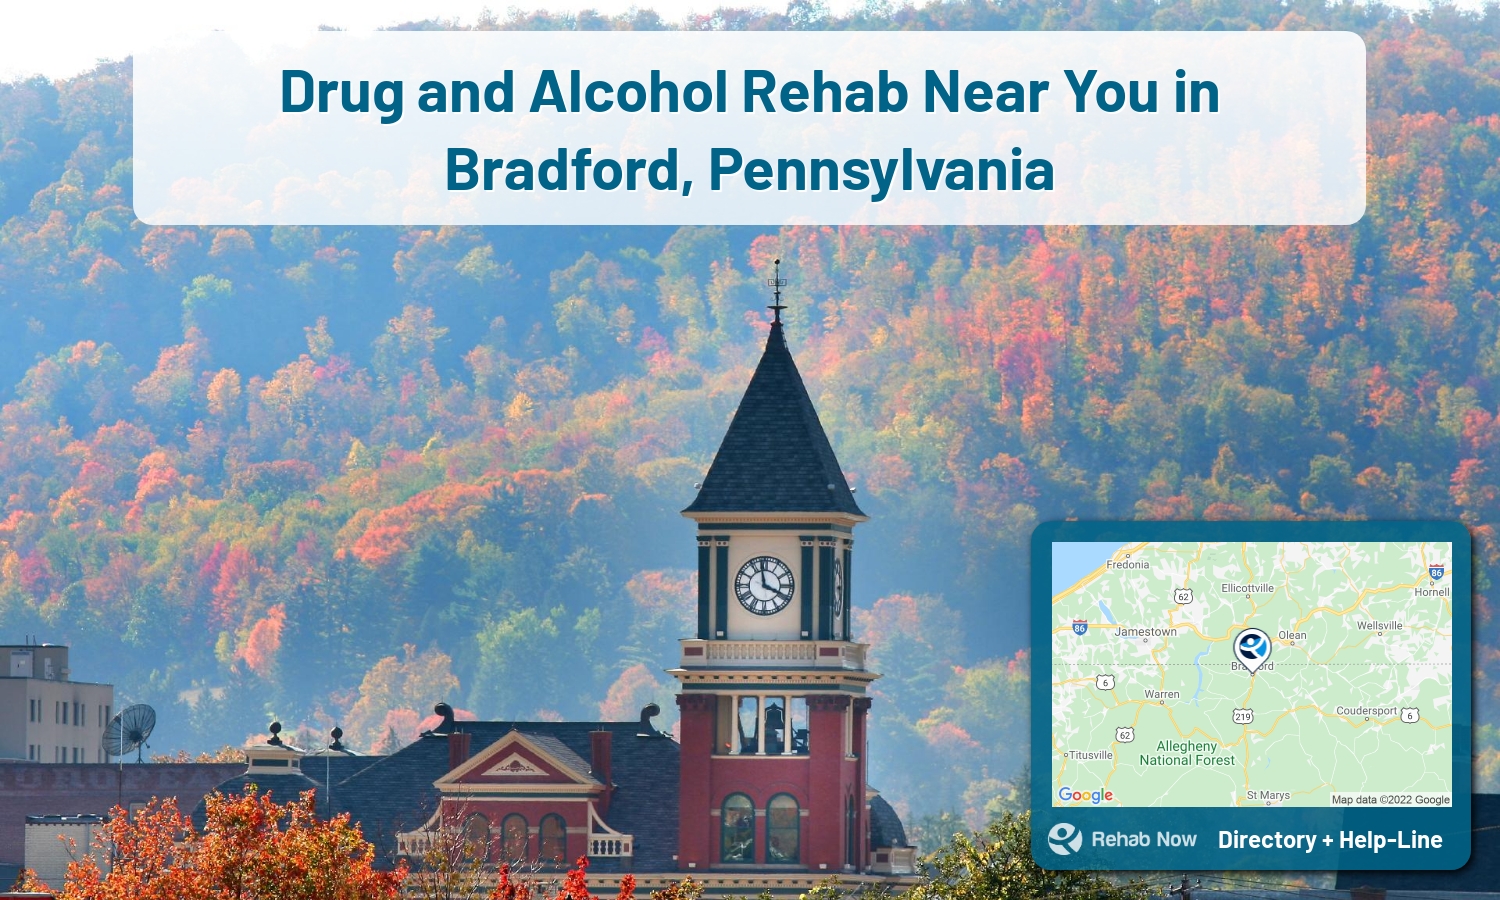 View options, availability, treatment methods, and more, for drug rehab and alcohol treatment in Bradford, Pennsylvania